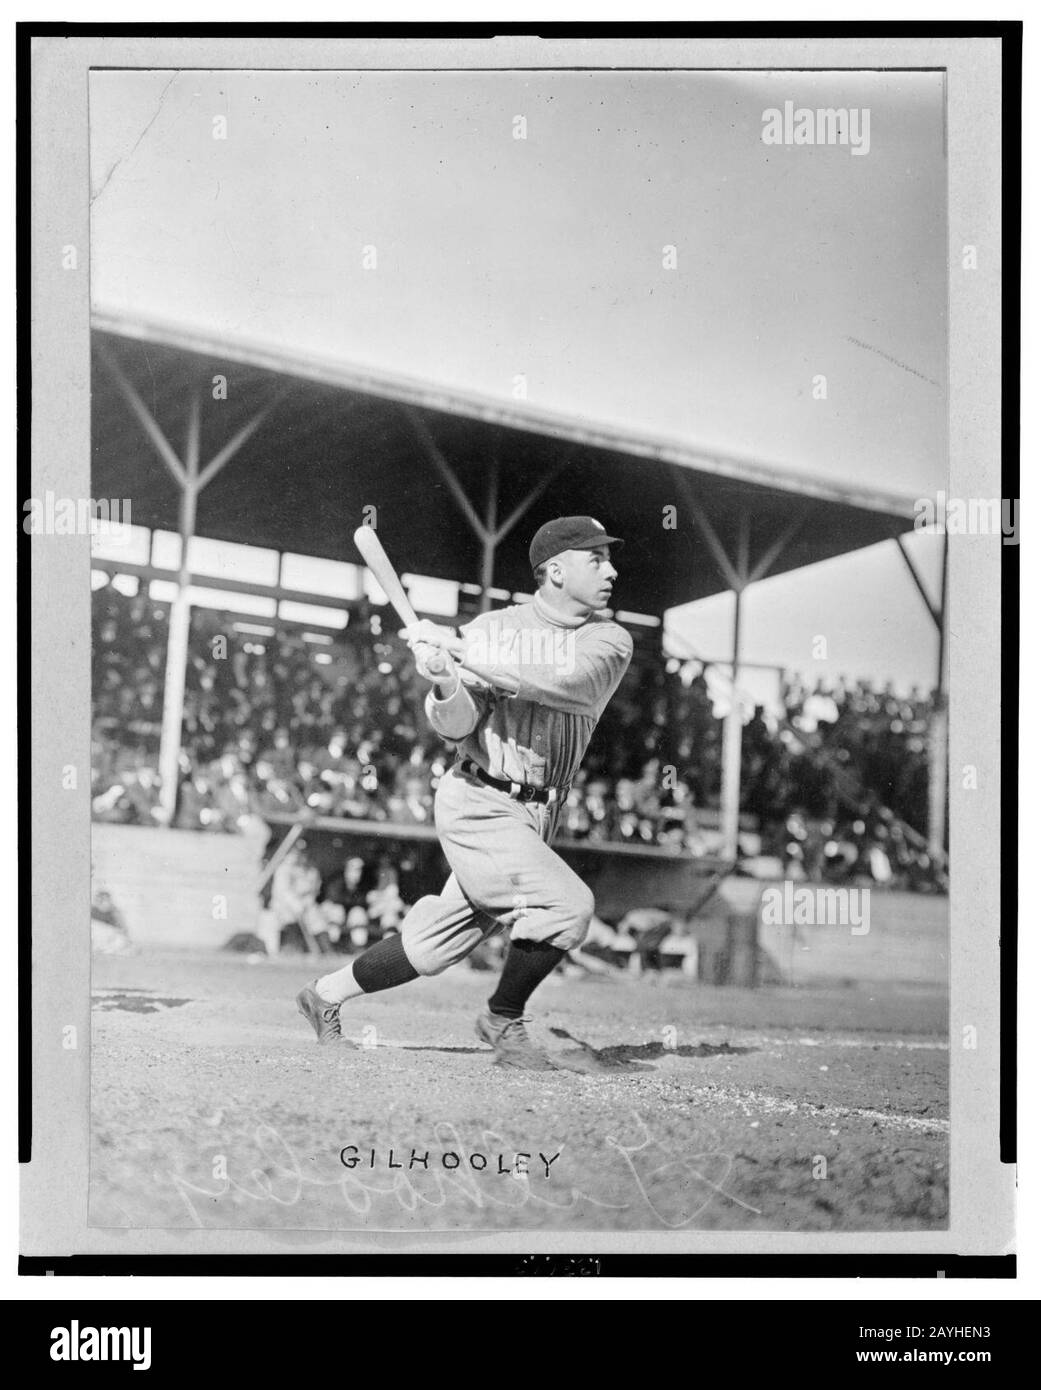 Frank Gilhooley, baseball player with the New York Yankees, swings his bat at home plate Stock Photo